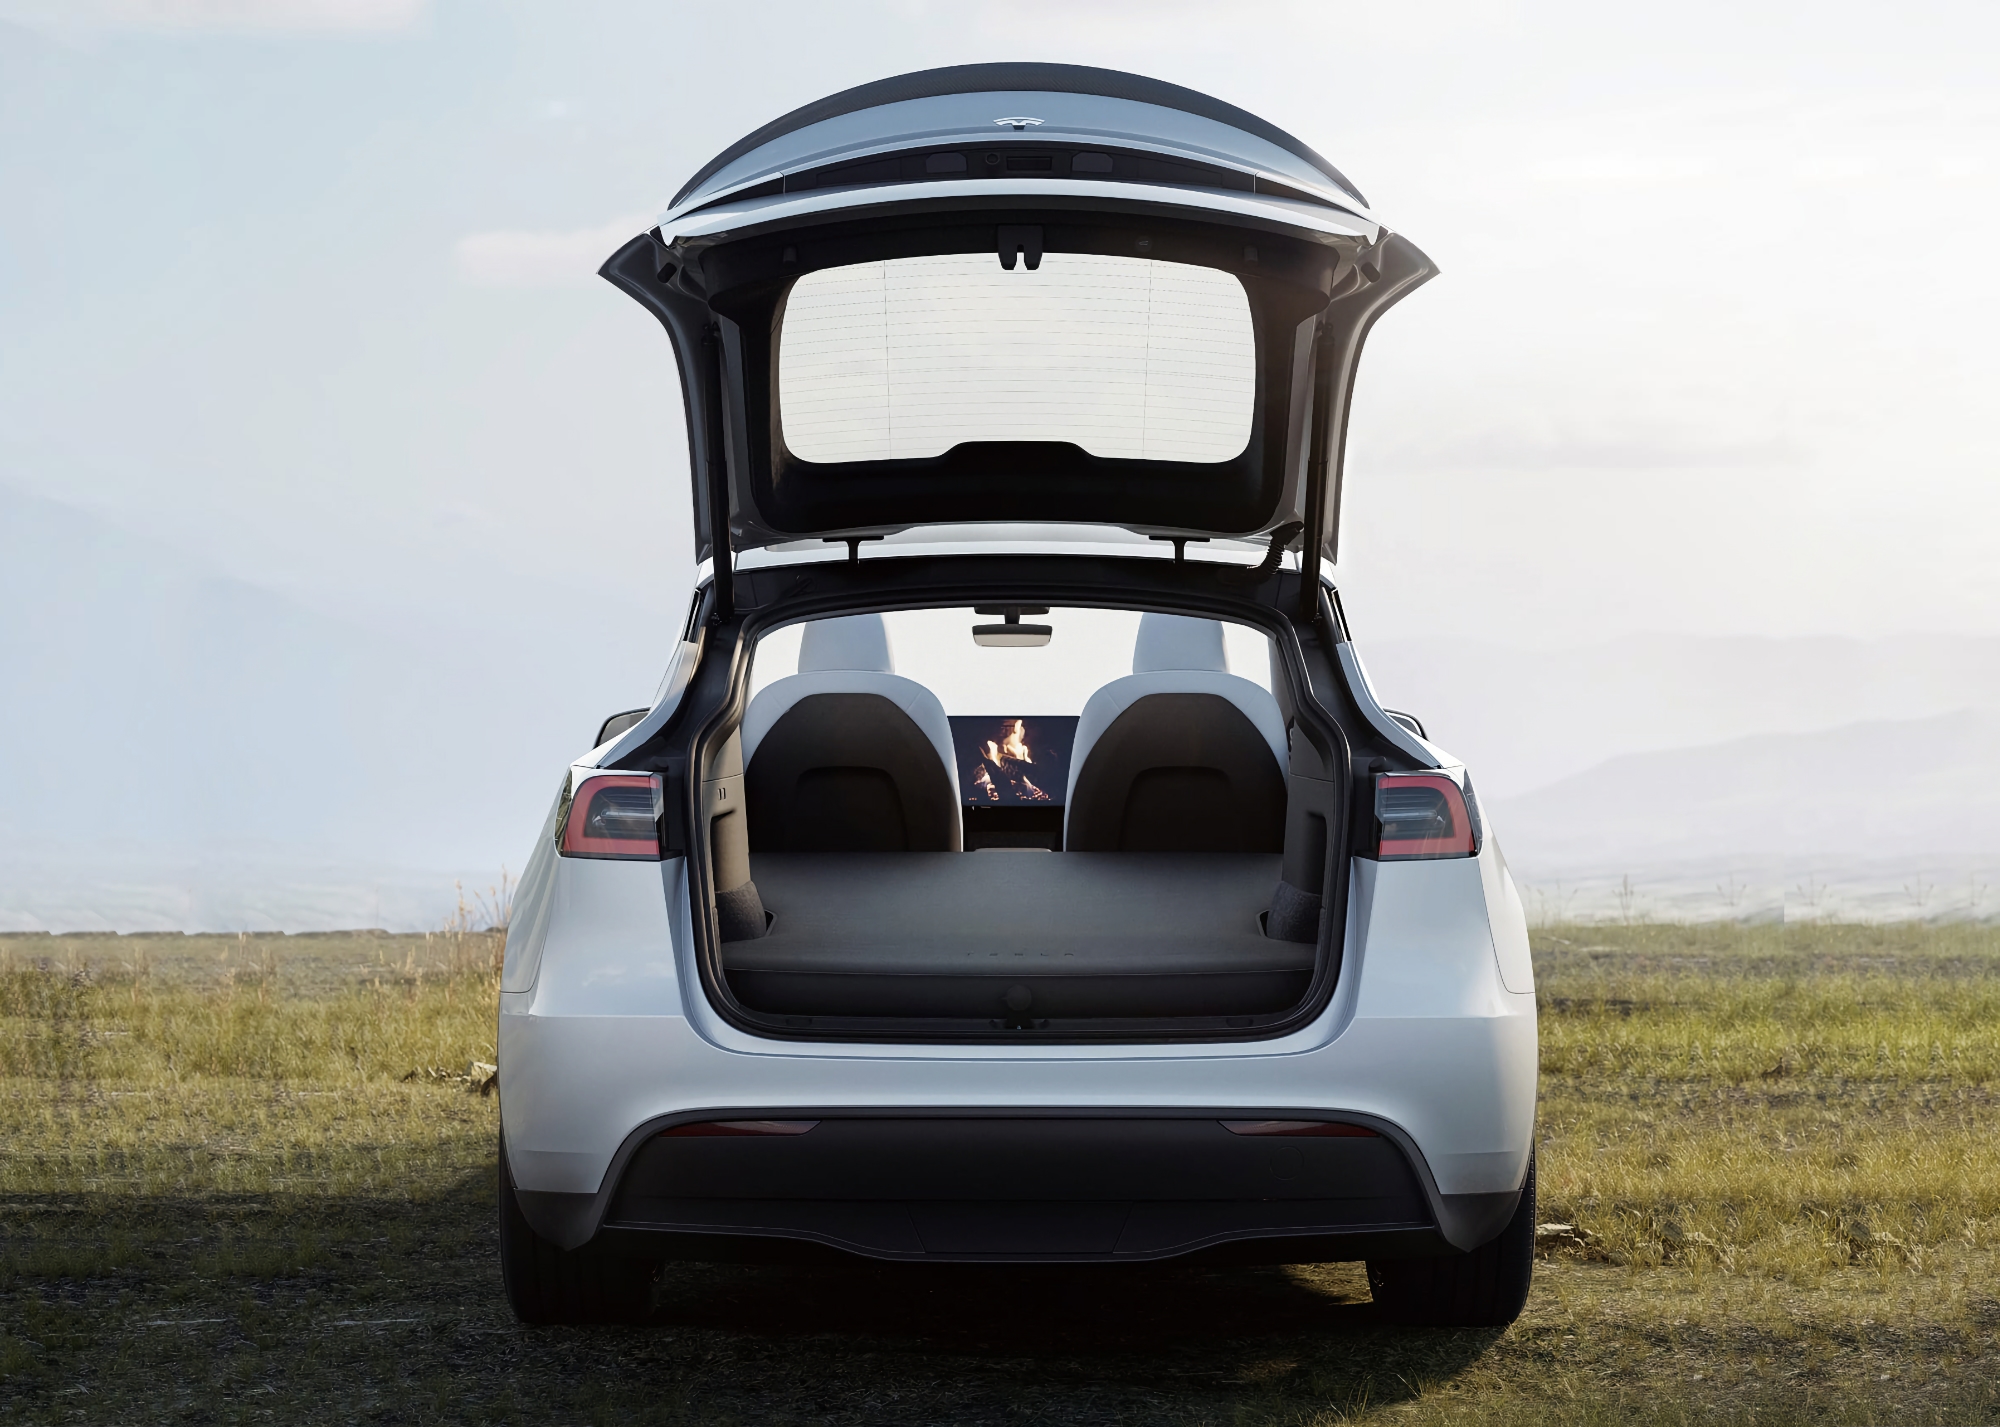 Tesla has unveiled a $225 mattress for the Model Y that will turn your electric car into a camping machine